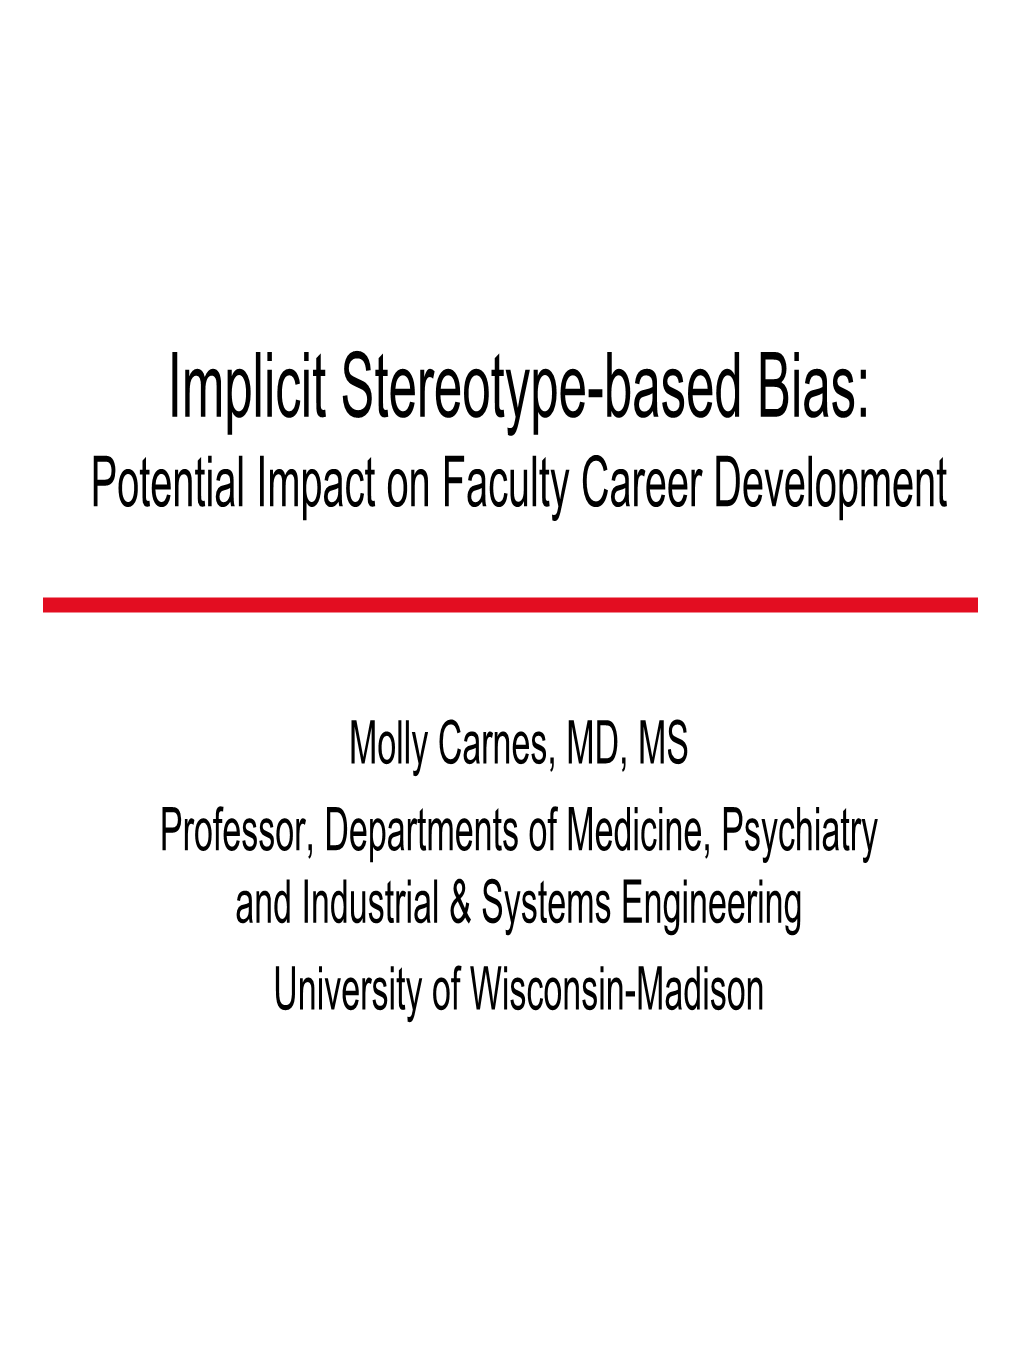 Implicit Stereotype-Based Bias: Potential Impact on Faculty Career Development